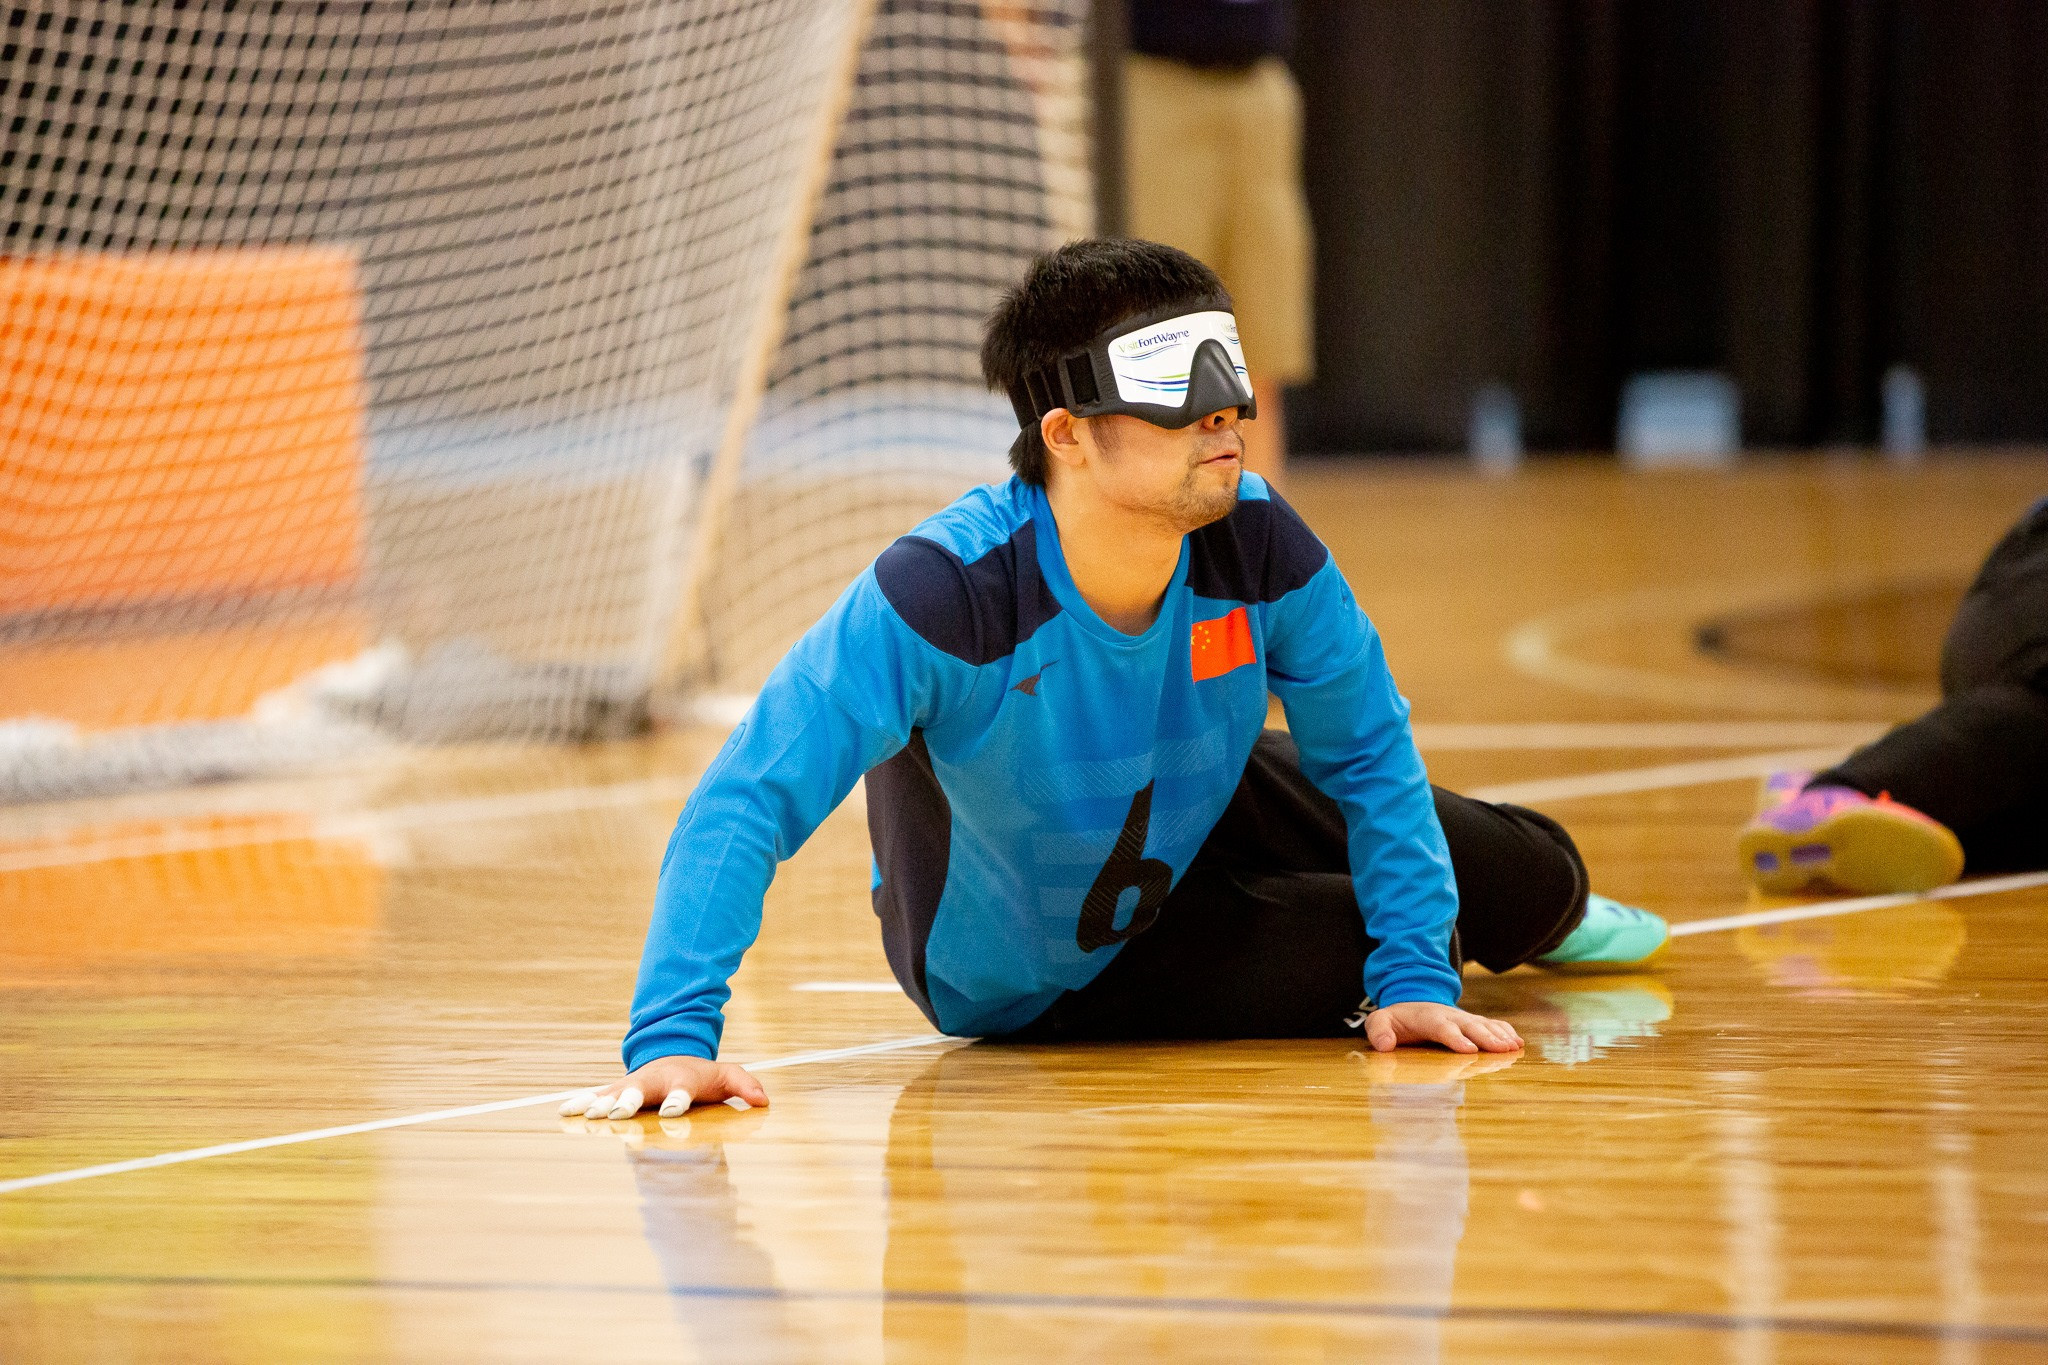 Tokyo 2020 place closer for United States after reach quarter-finals at IBSA Goalball International Qualifier